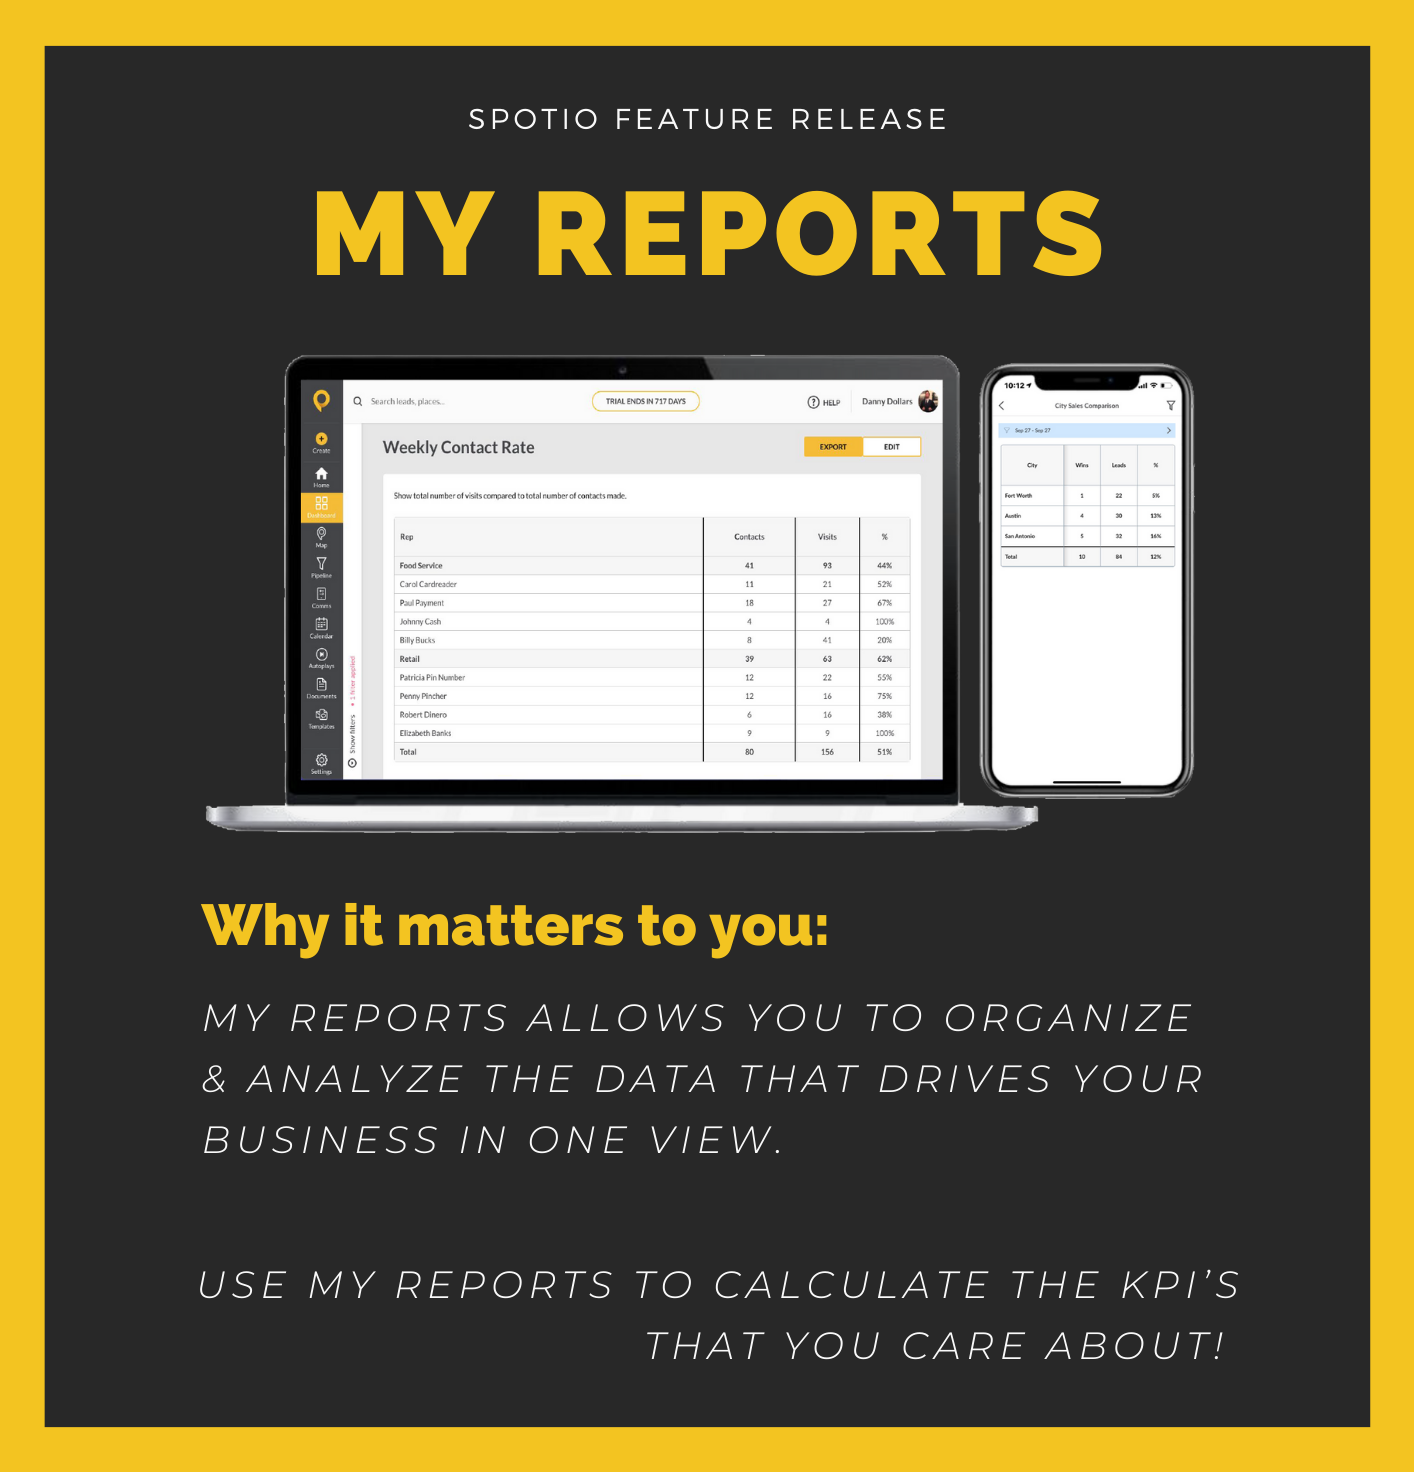 SPOTIO's My Reports Value